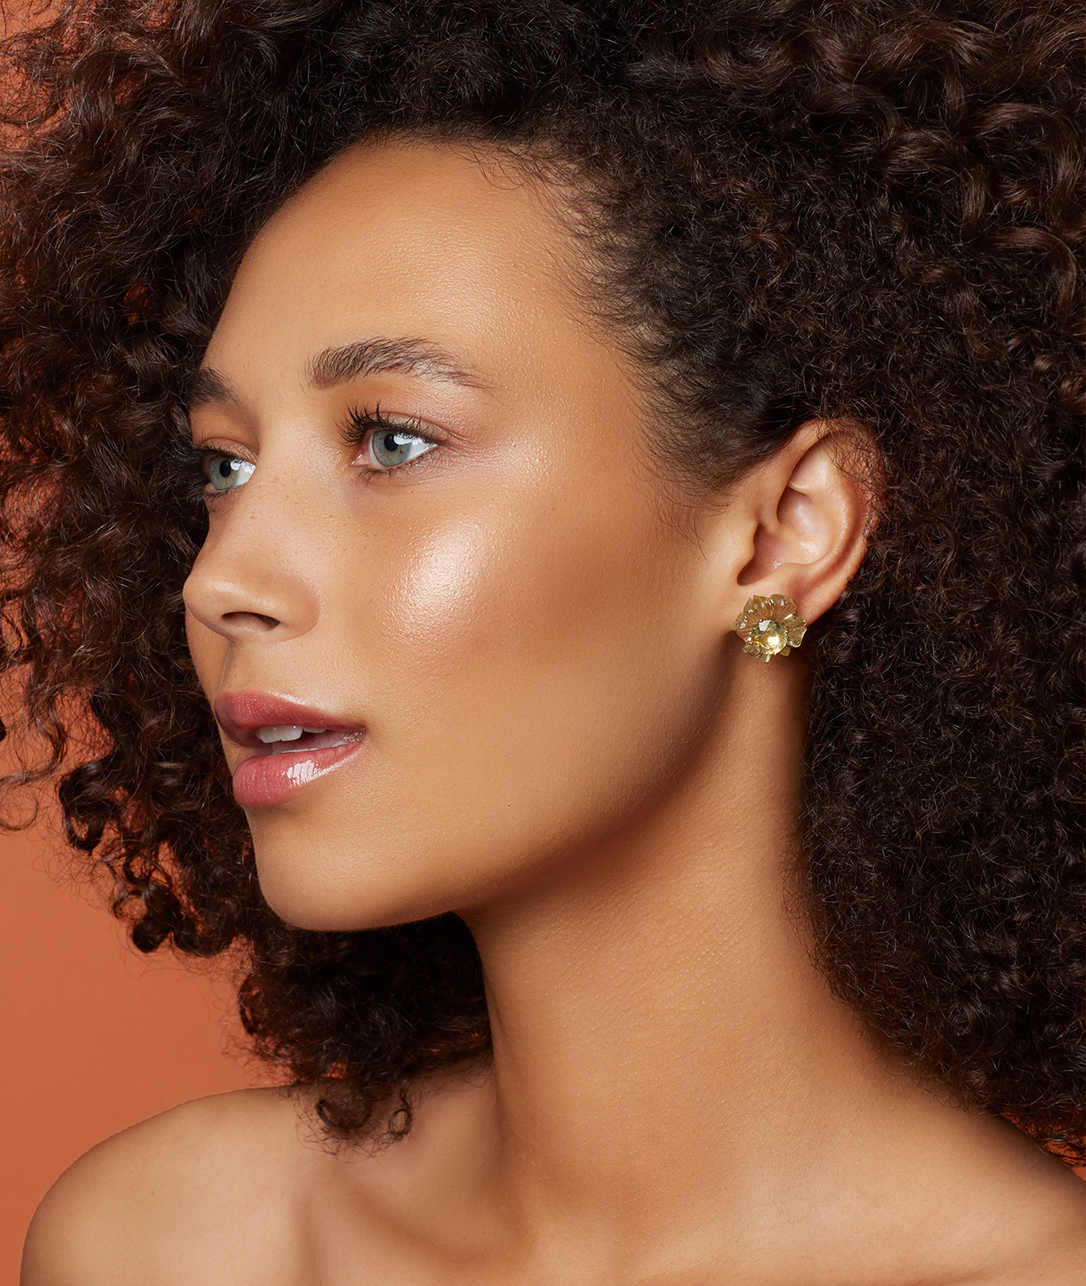 For floral followers, each pair of our Tropical Flower Studs are composed of hand-carved blooms with center stone accents.SHOP TROPICAL FLOWER STUDS